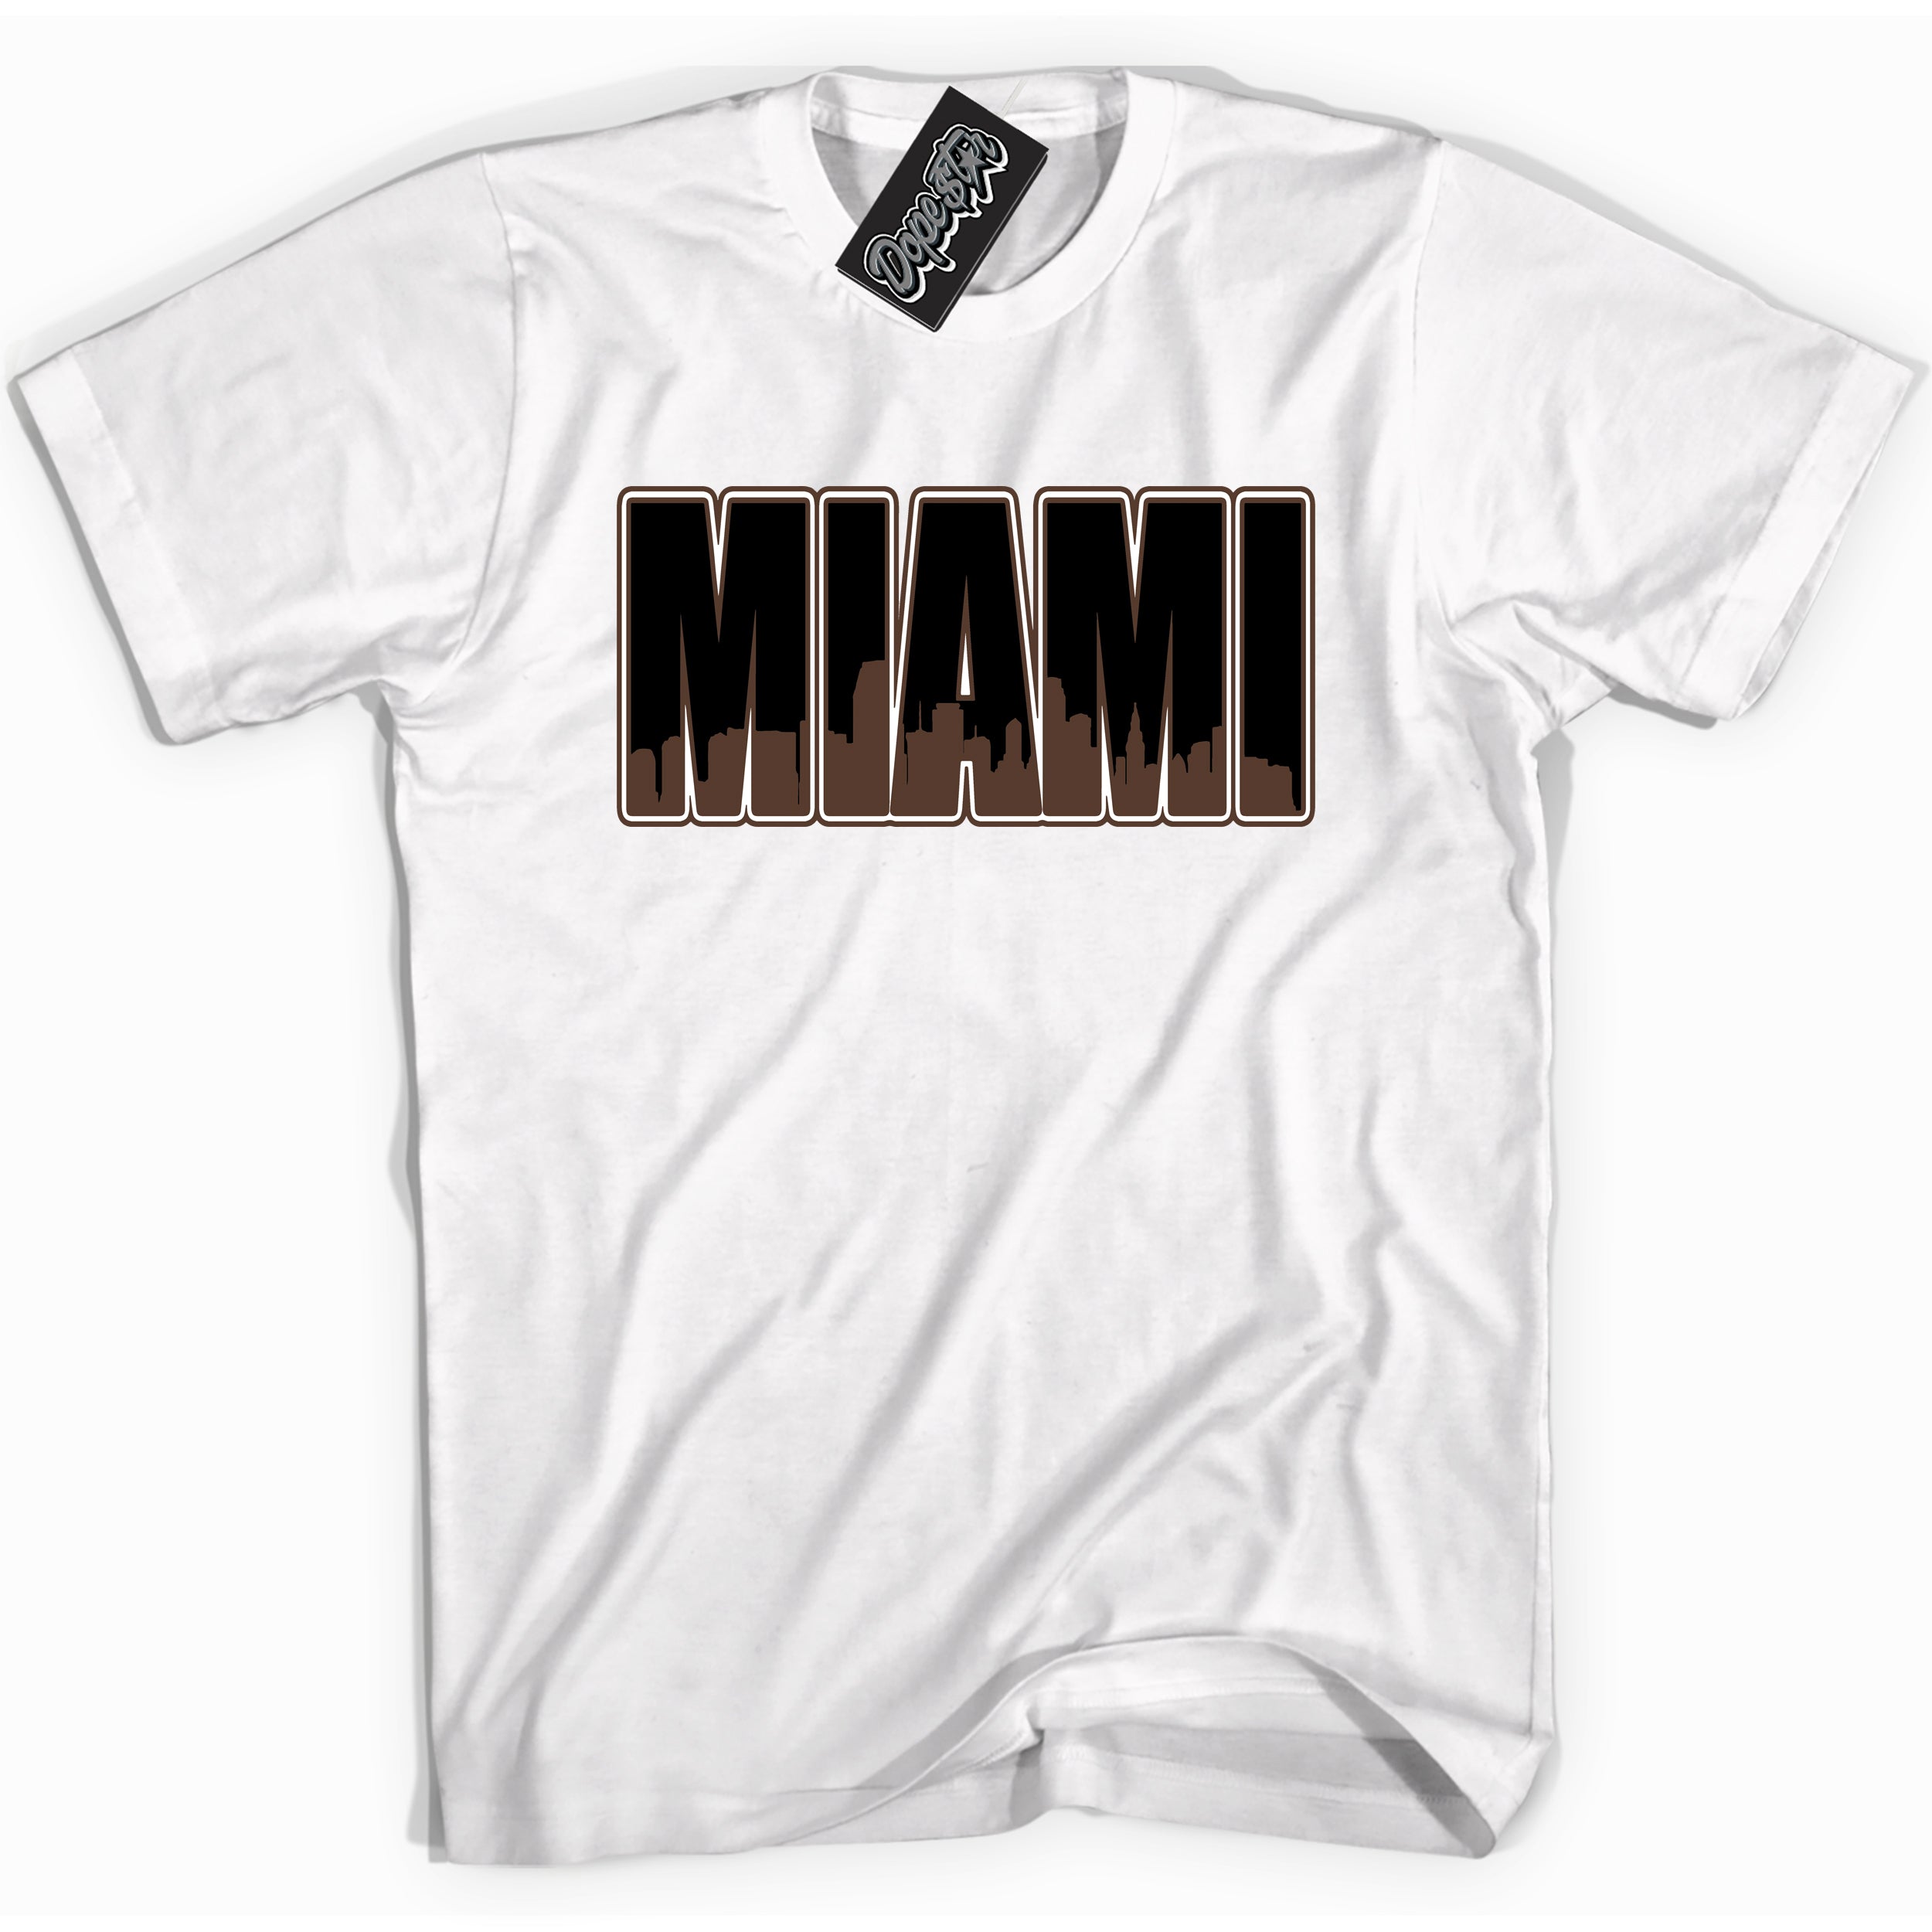 Cool White graphic tee with “ Miami ” design, that perfectly matches Palomino 1s sneakers 